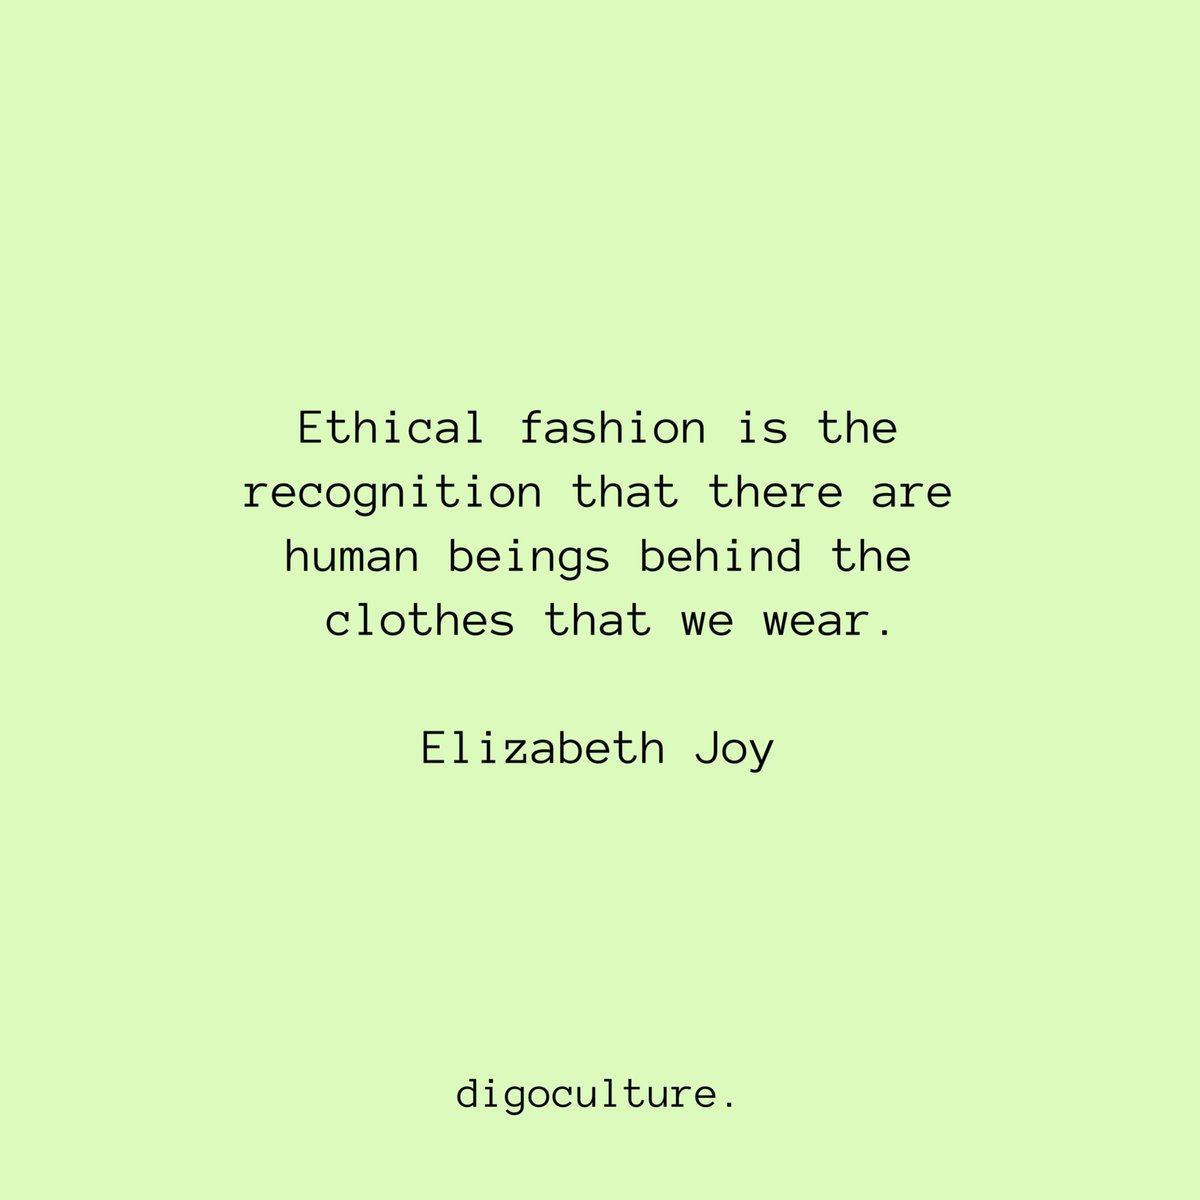 Ethical fashion is the combination of both fair trade and sustainable fashion. It focuses on improving the working conditions of the workers, along with environmental impact of the clothing production process.
#letscreateaculture
#ethicalfashion 
#fairtradefashion
#ecofriendly